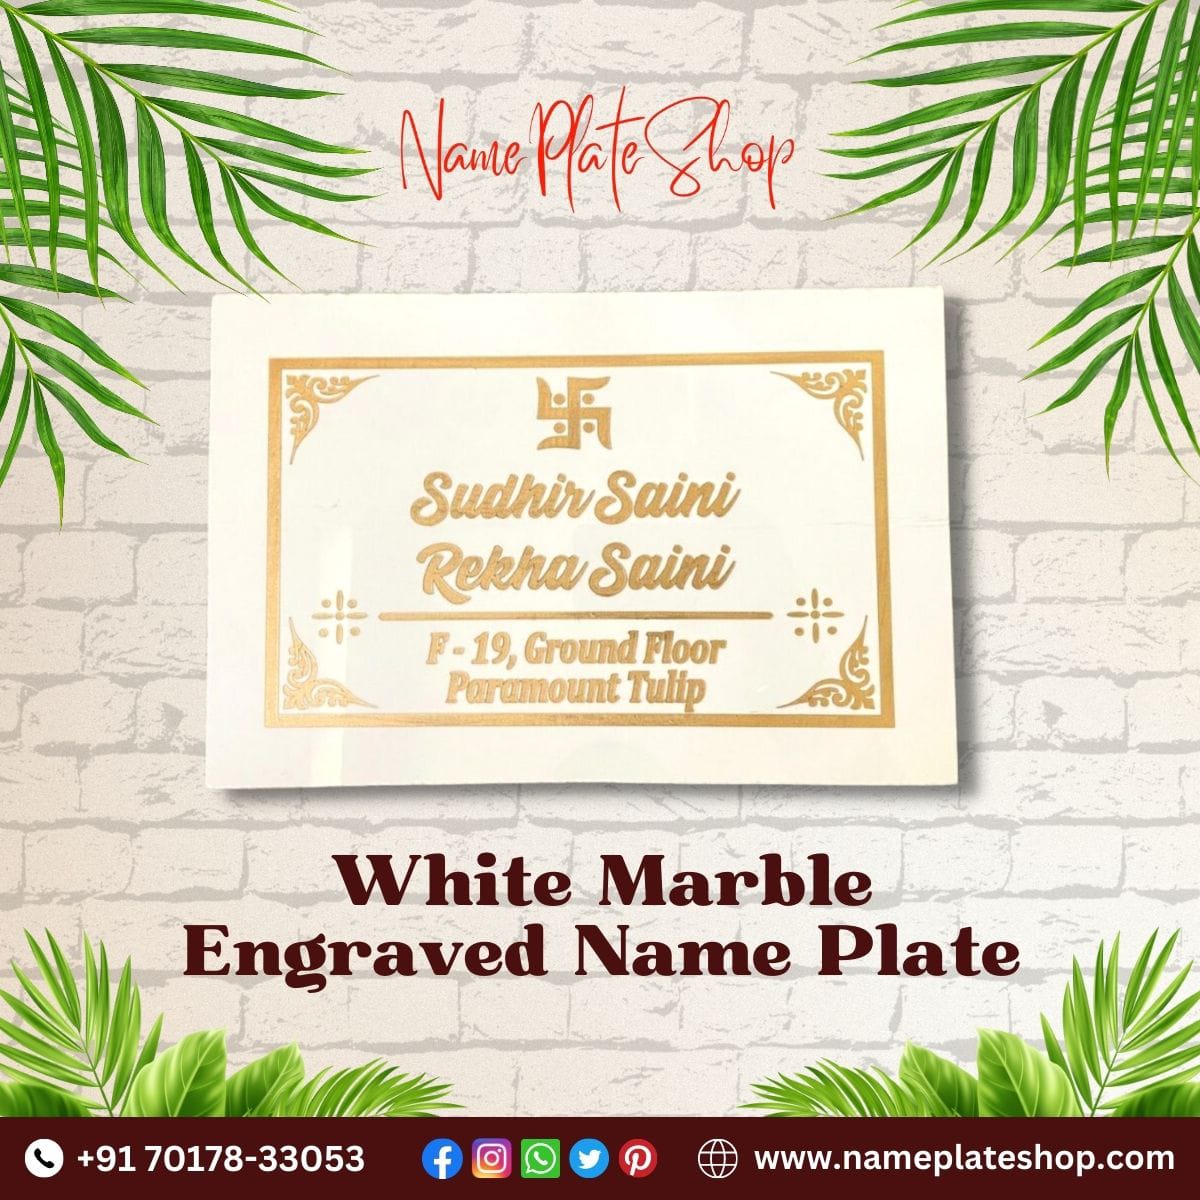 Get Your Personalized Marble Engraved Name Plate At Best Offers,Haridwar,Others,Services,77traders